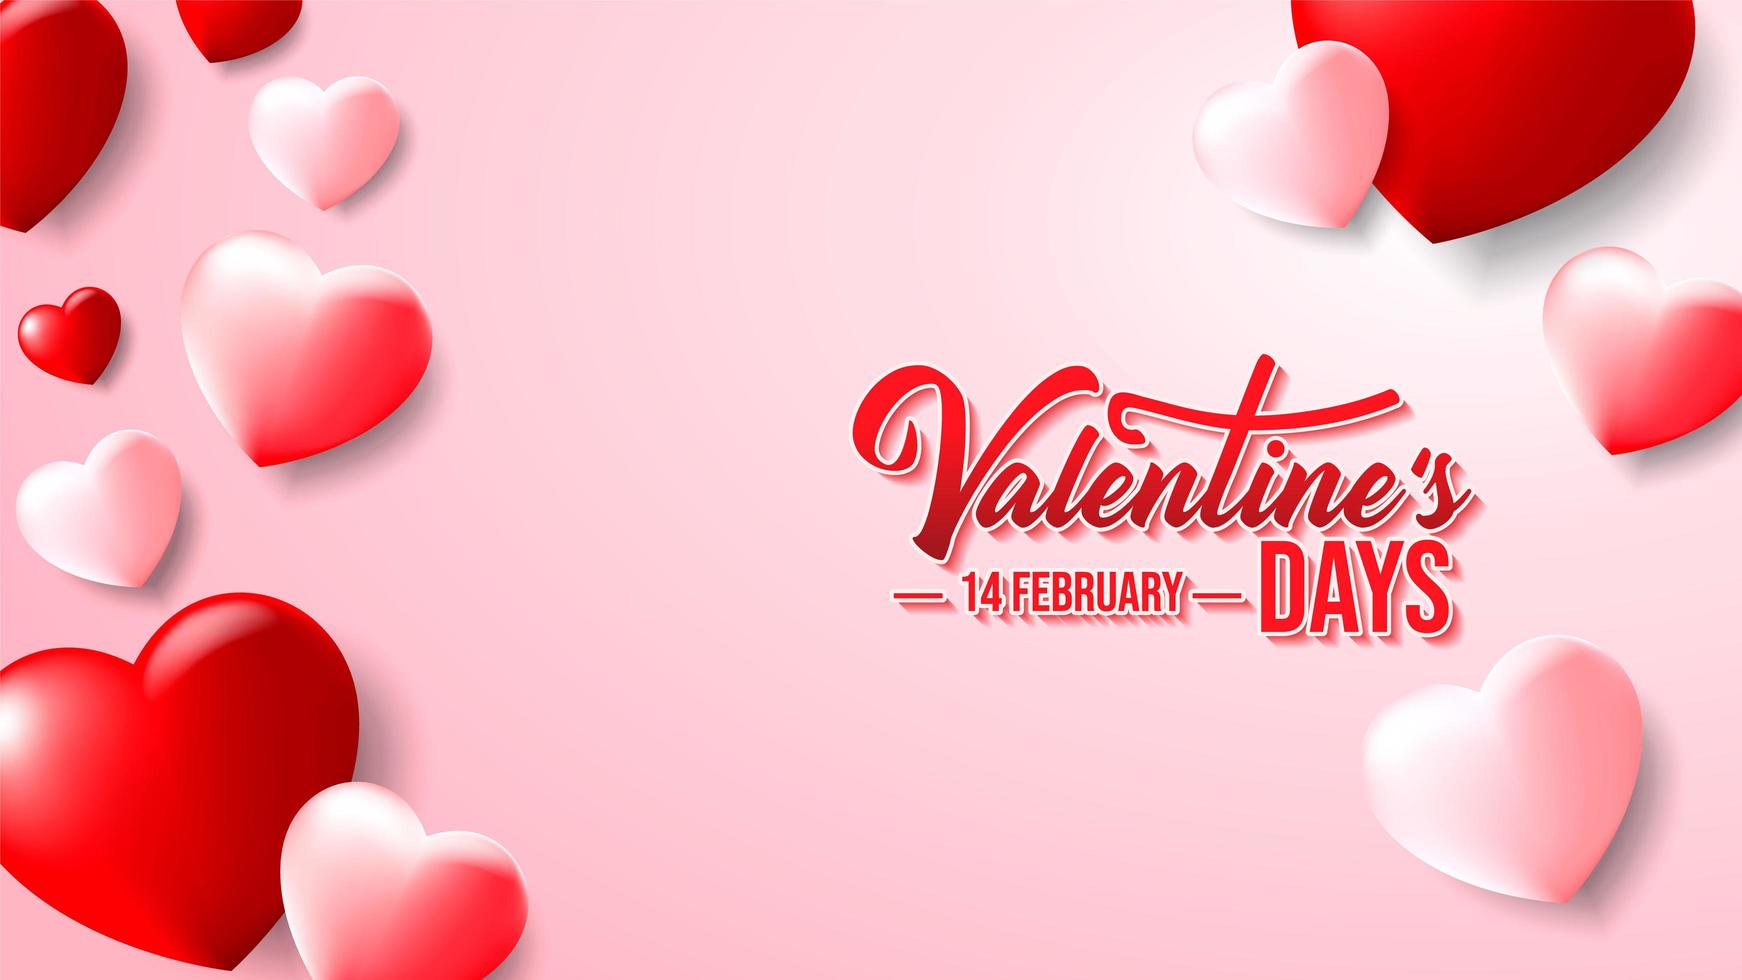 Valentine's Day Love Design with Pink and Red Hearts vector